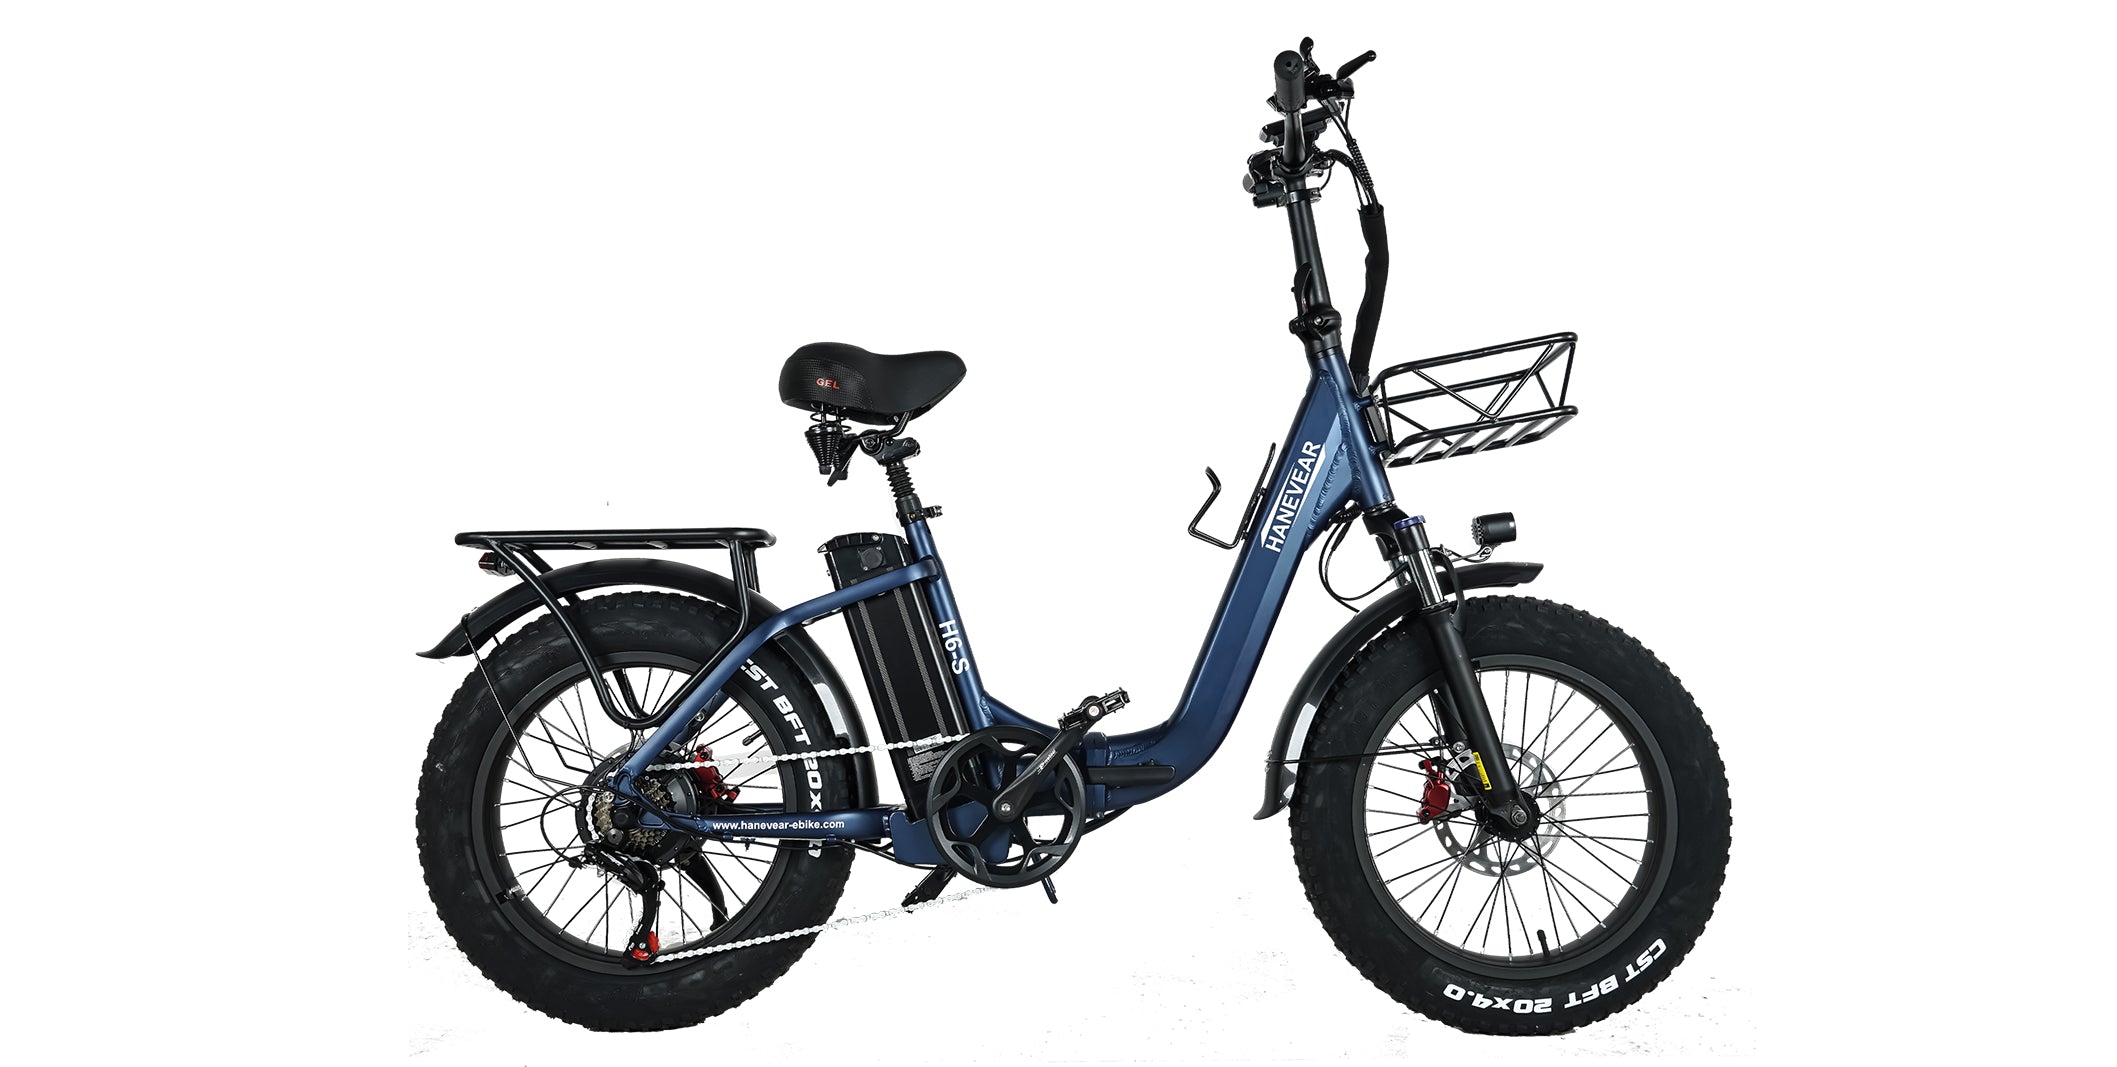 HANEVEAR H6-S Folding Electric Bike for Adults